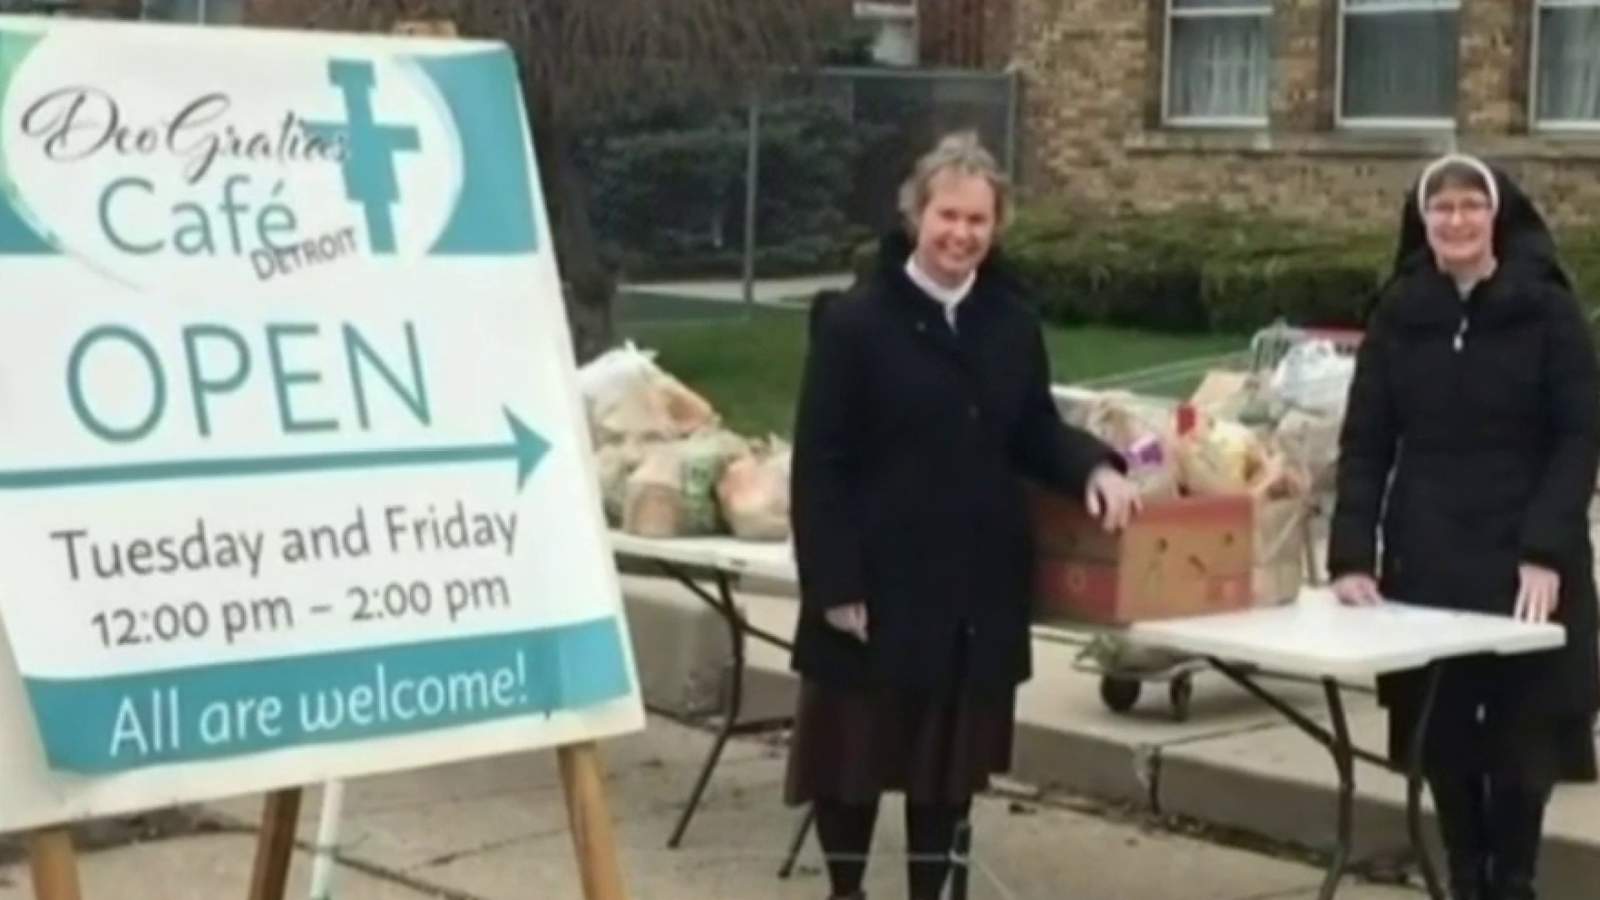 Detroit convent sets up charity that helps local businesses, families stay afloat